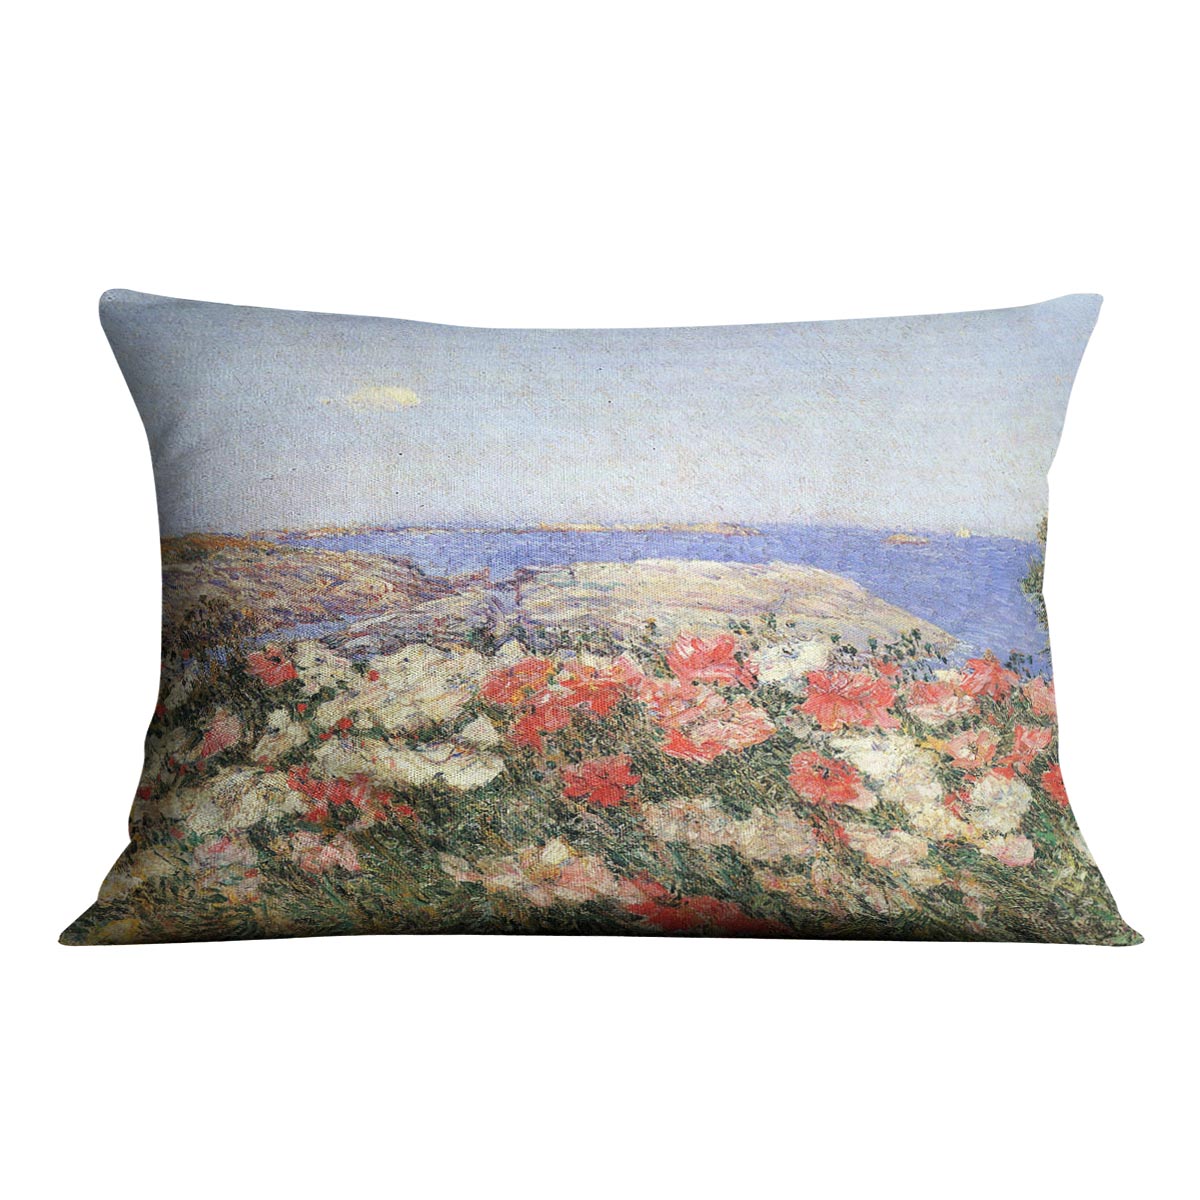 Poppies on the Isles of Shoals by Hassam Cushion - Canvas Art Rocks - 4